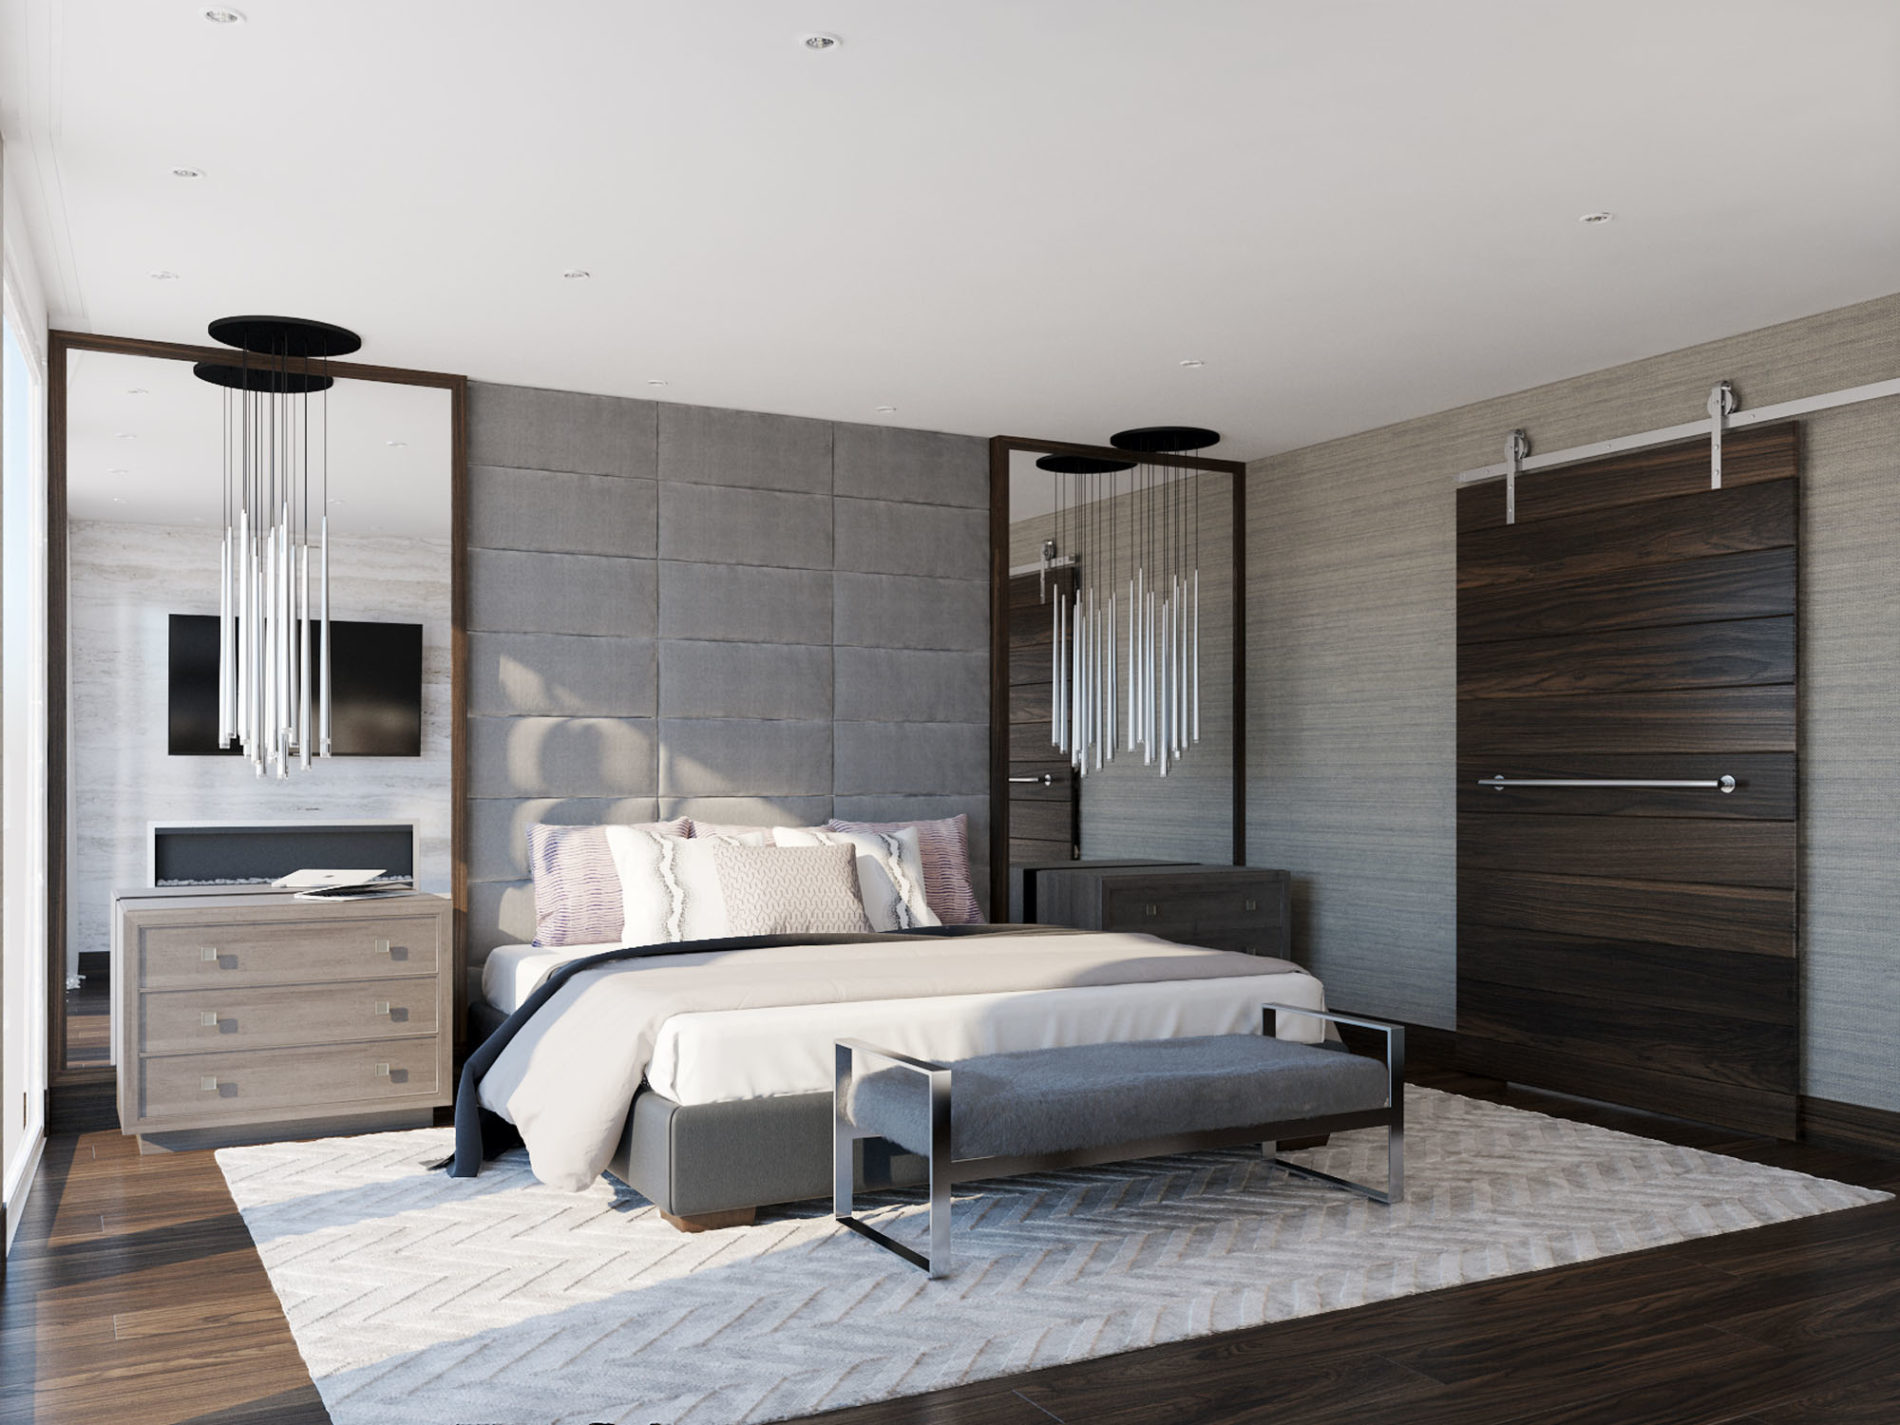 In this bedroom rendering we focused on using warm tones and natural elements to create a relaxed atmosphere. We created a custom floor to ceiling channel headboard as the focal point with built in framed oversized mirrors and ceiling mounted polished chrome pendant lights.  The selections include: Silver travertine slab, Panget white oak flooring, Restoration Hardware pendants and Bernhardt Furniture nightstands.
